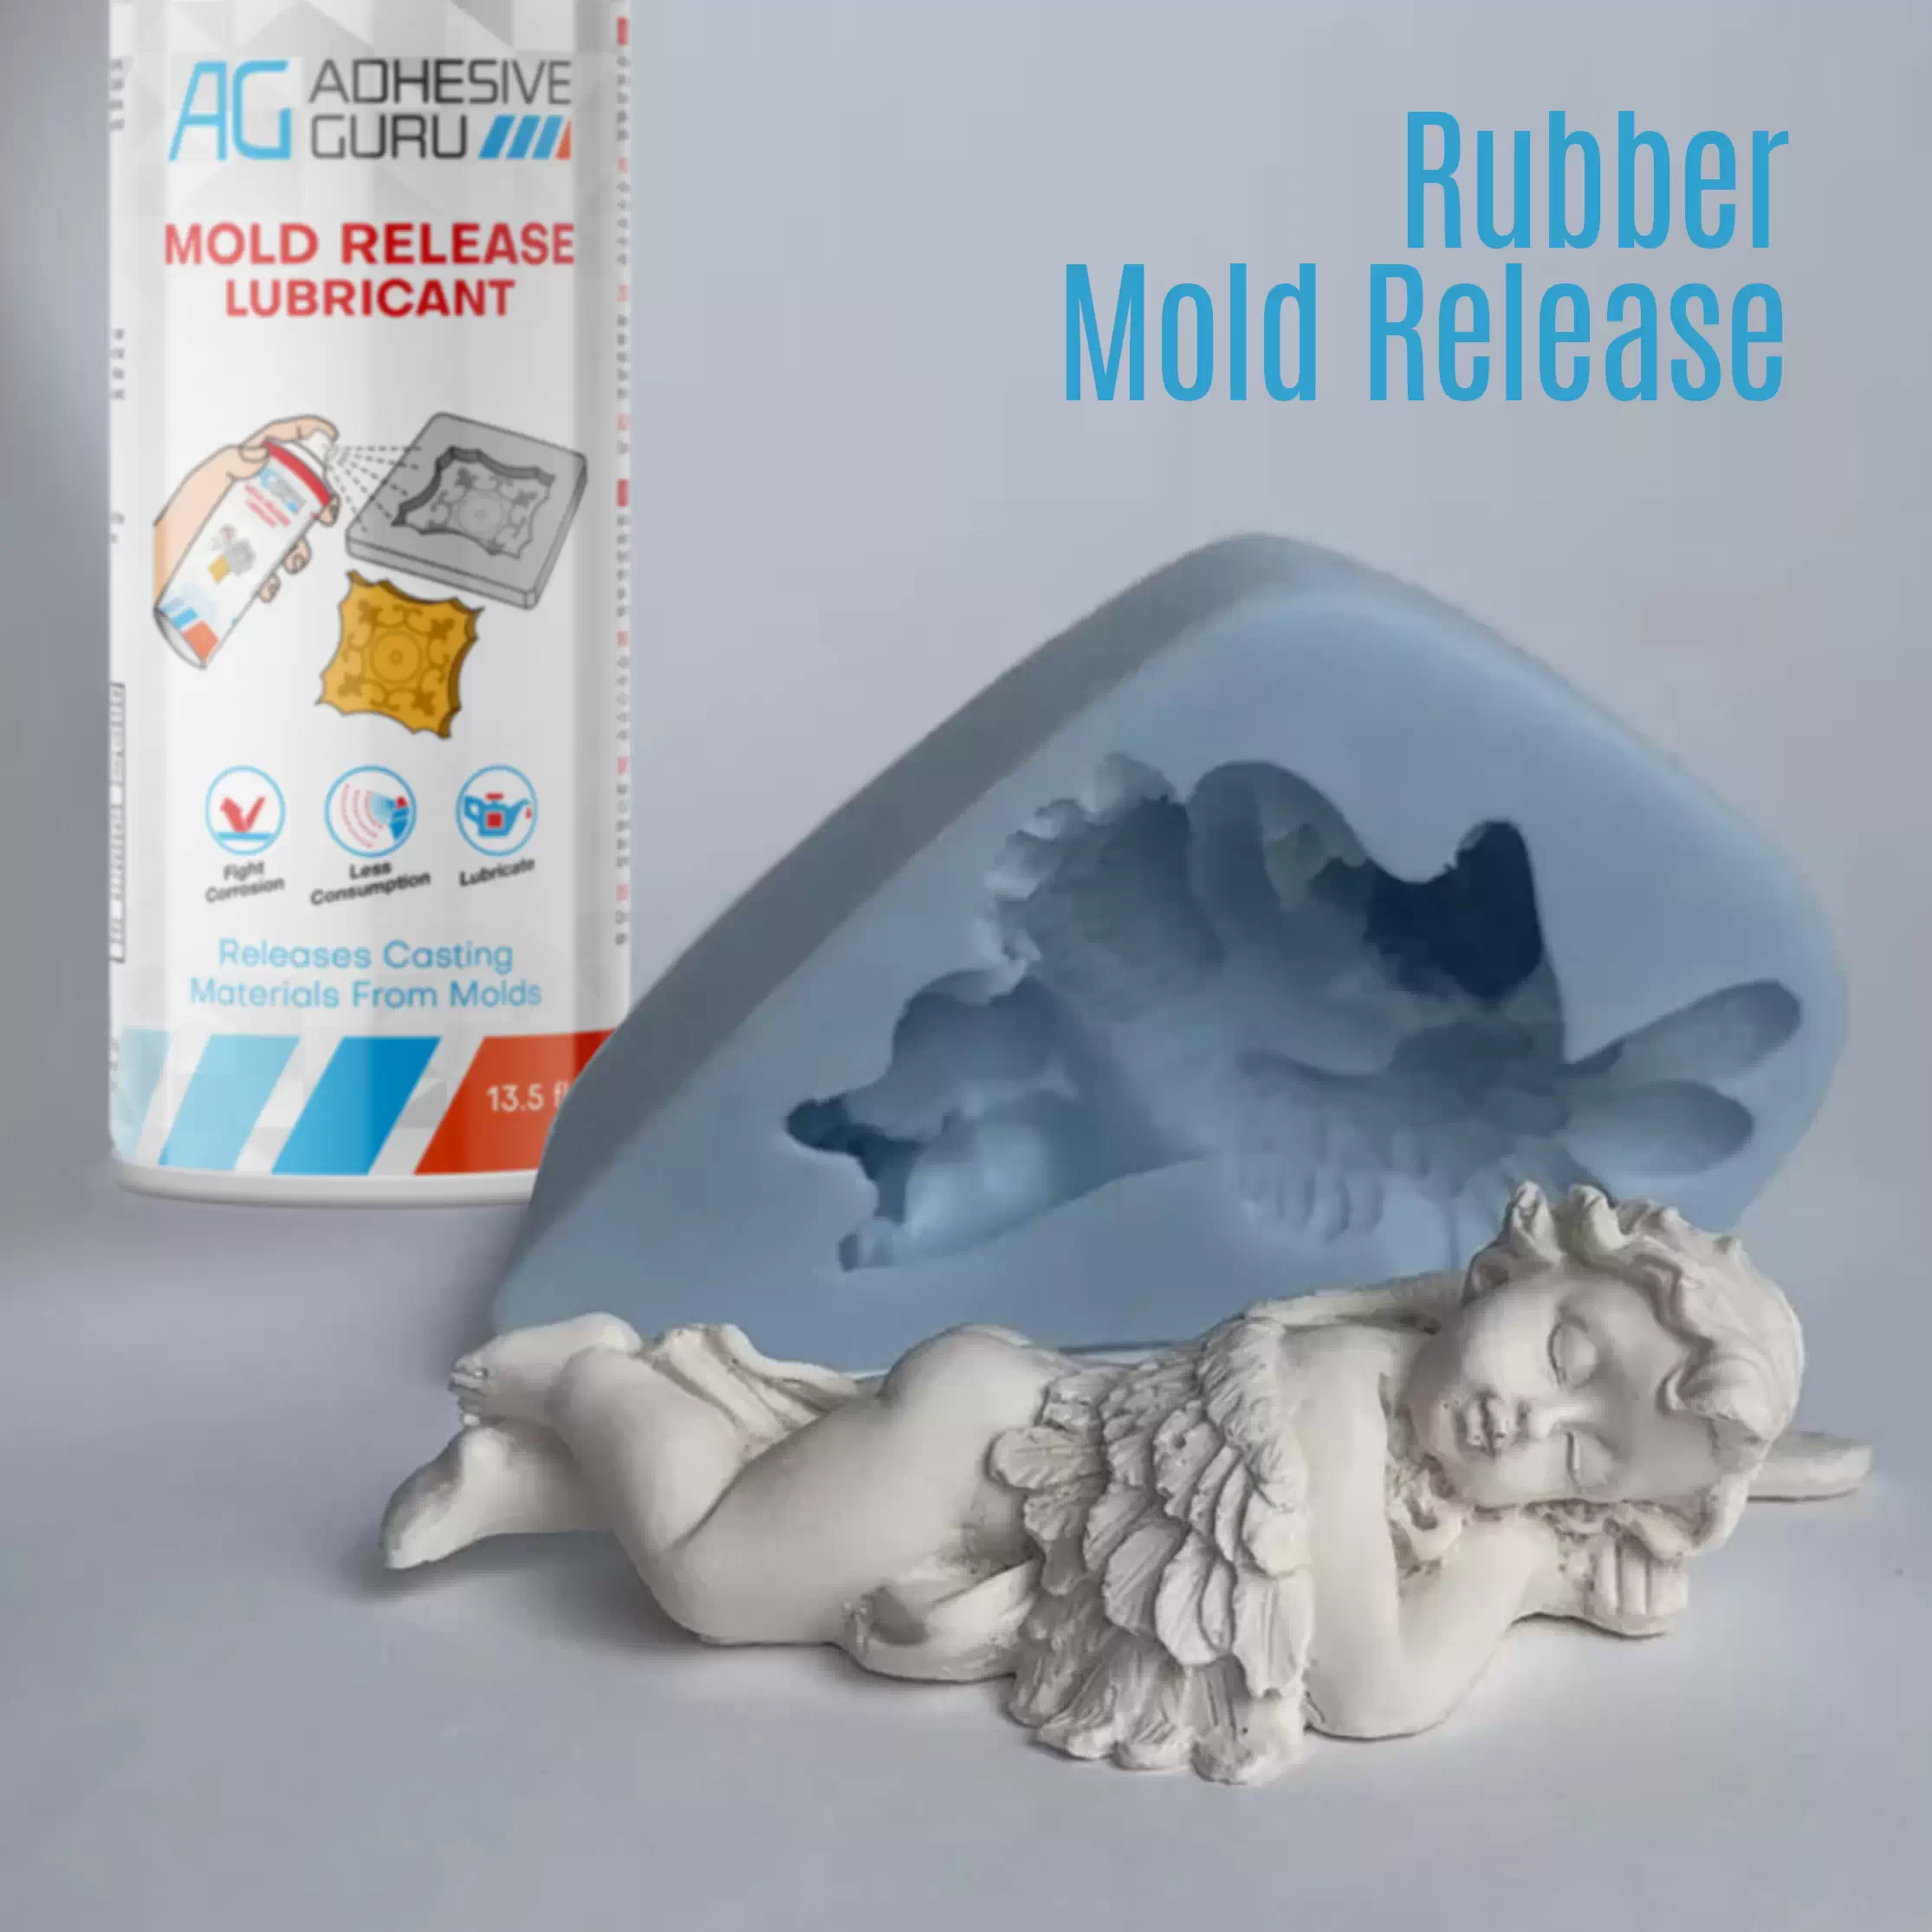 Mold release lubricants